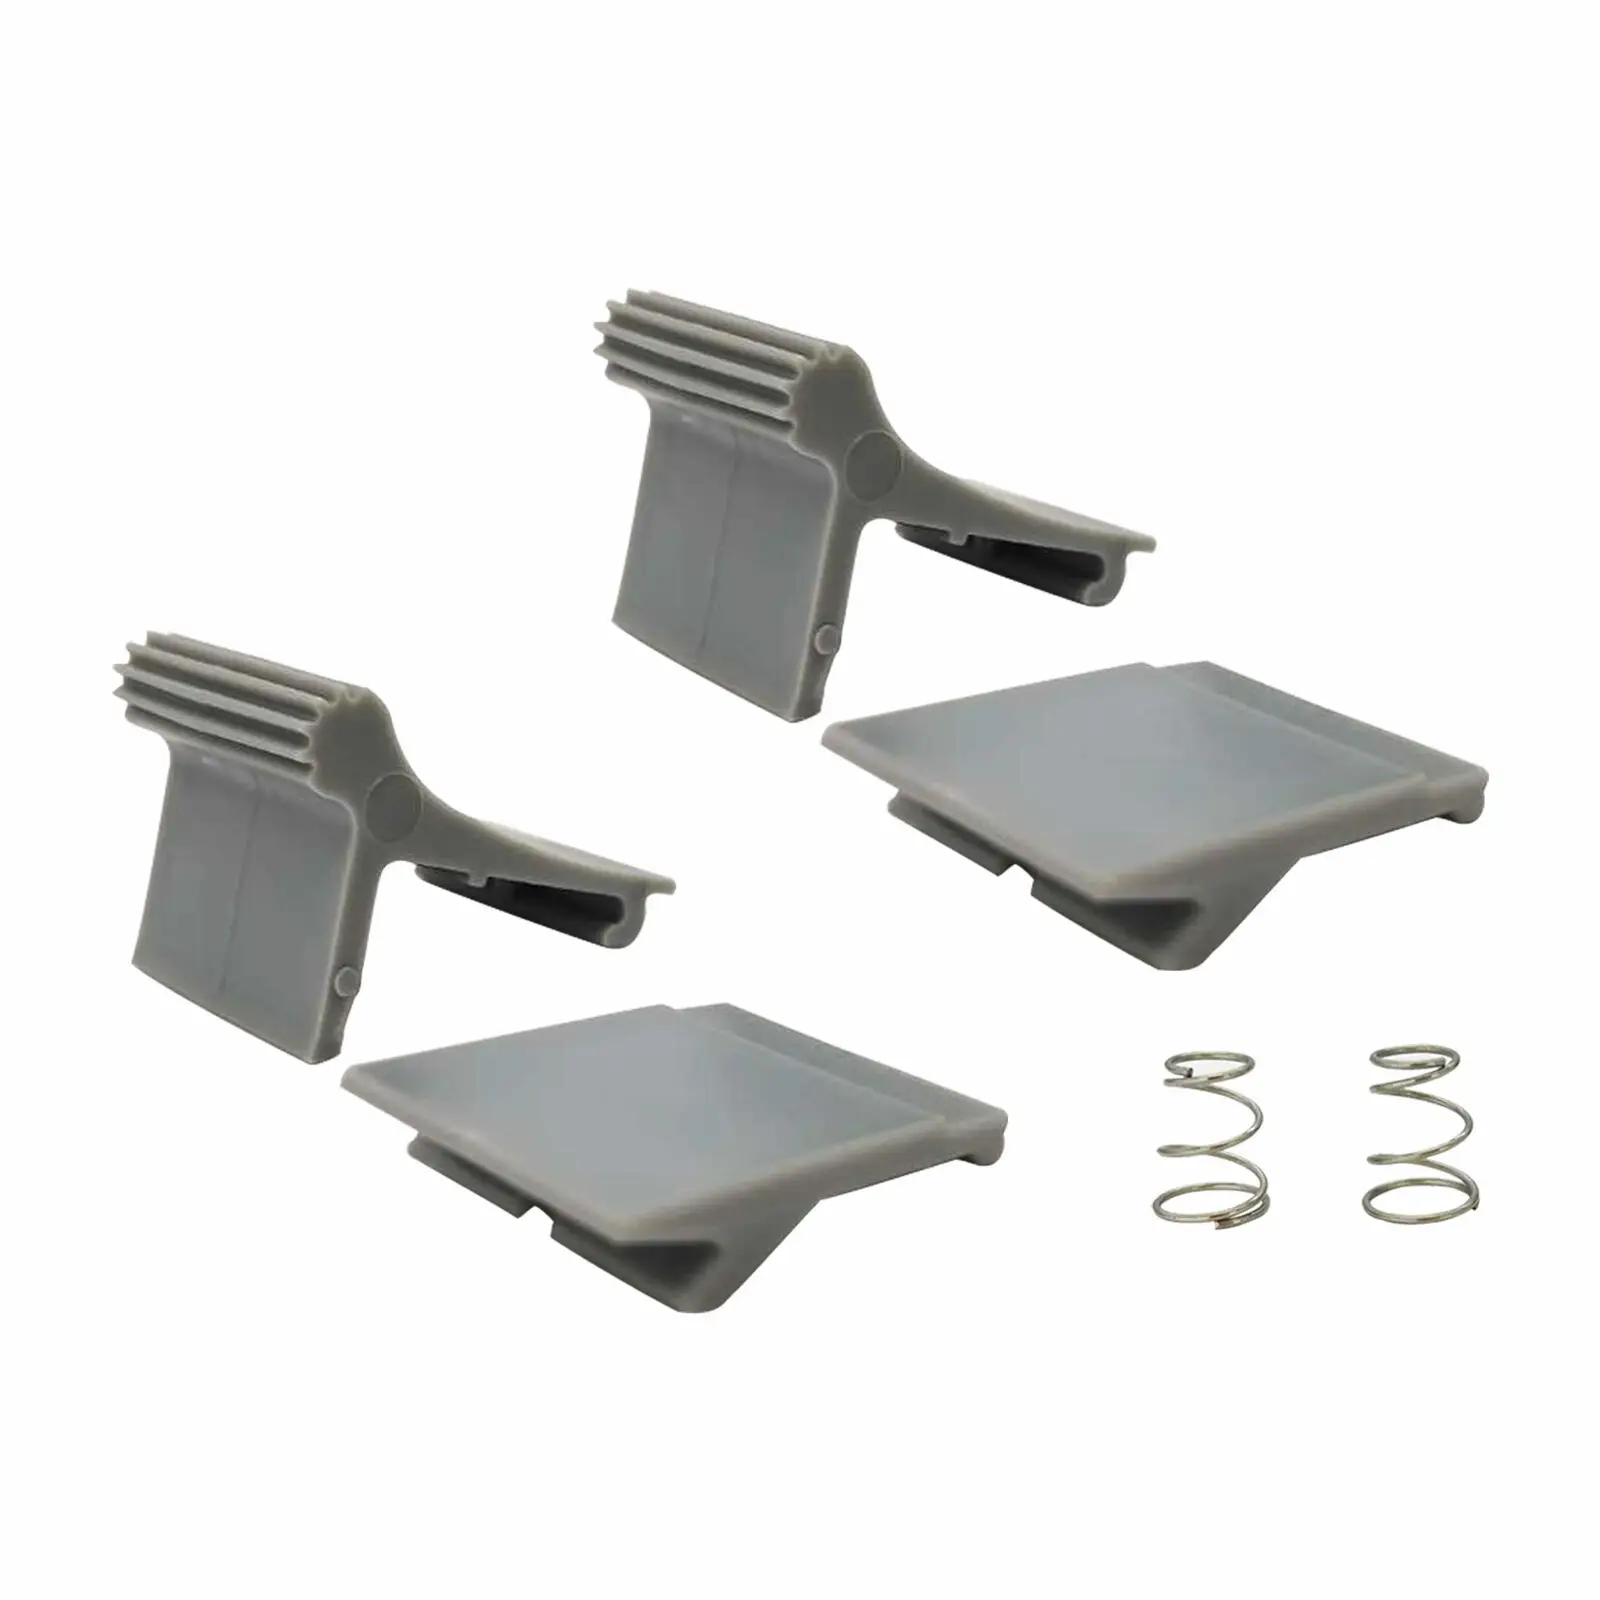 830472P002 RV Patio Awning Slider Catch patio retractable side awning 600x160 cm grey